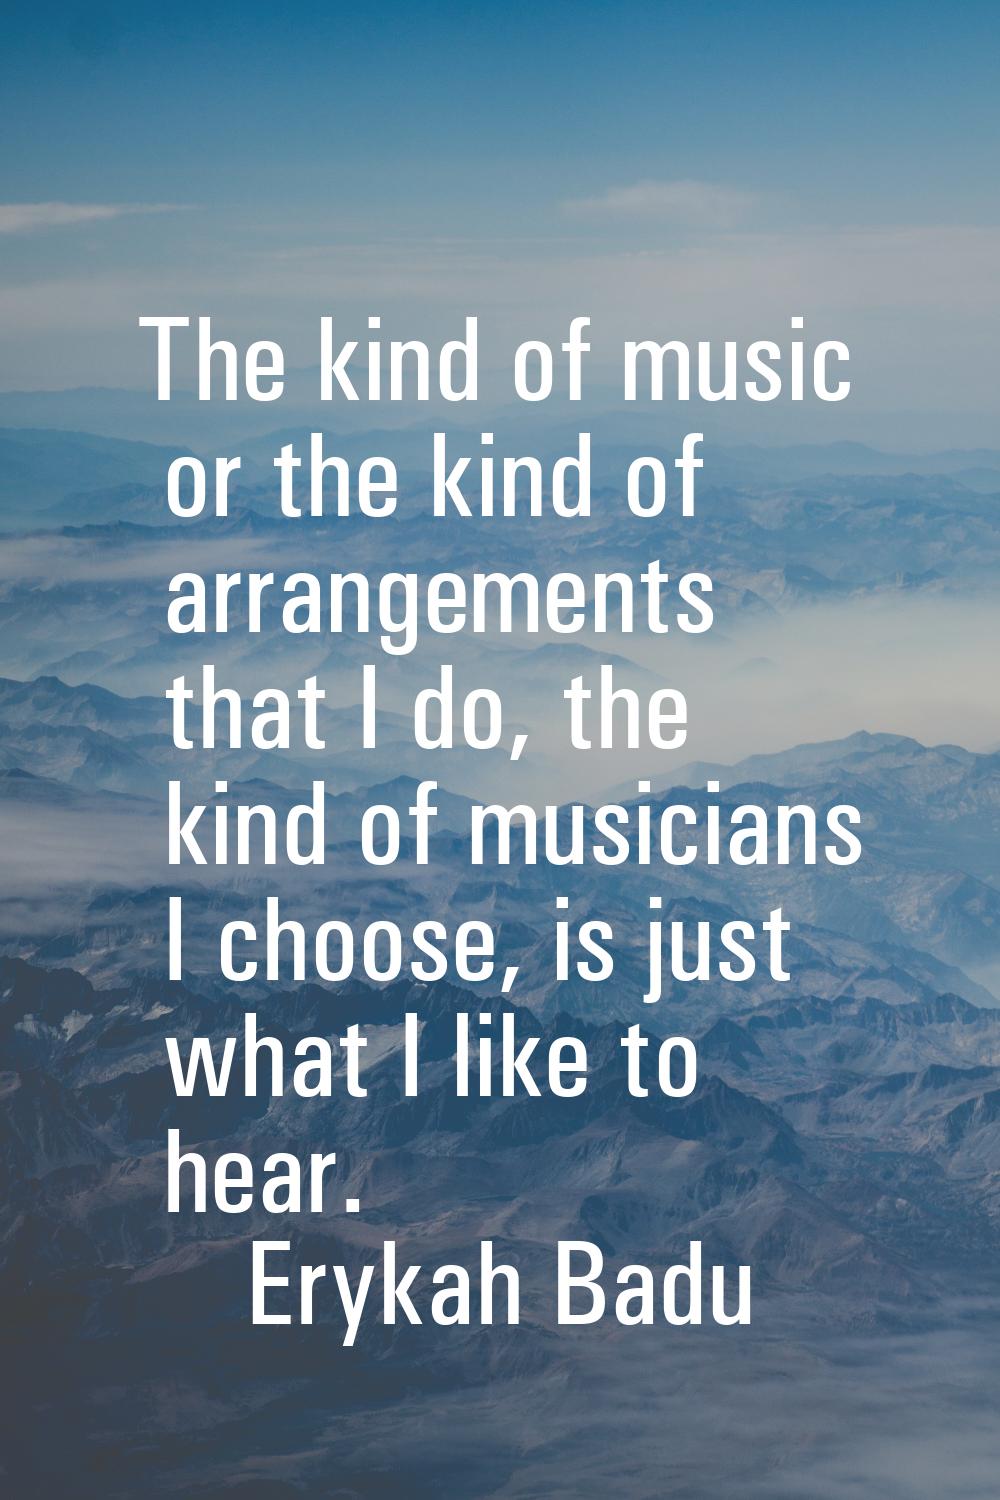 The kind of music or the kind of arrangements that I do, the kind of musicians I choose, is just wh